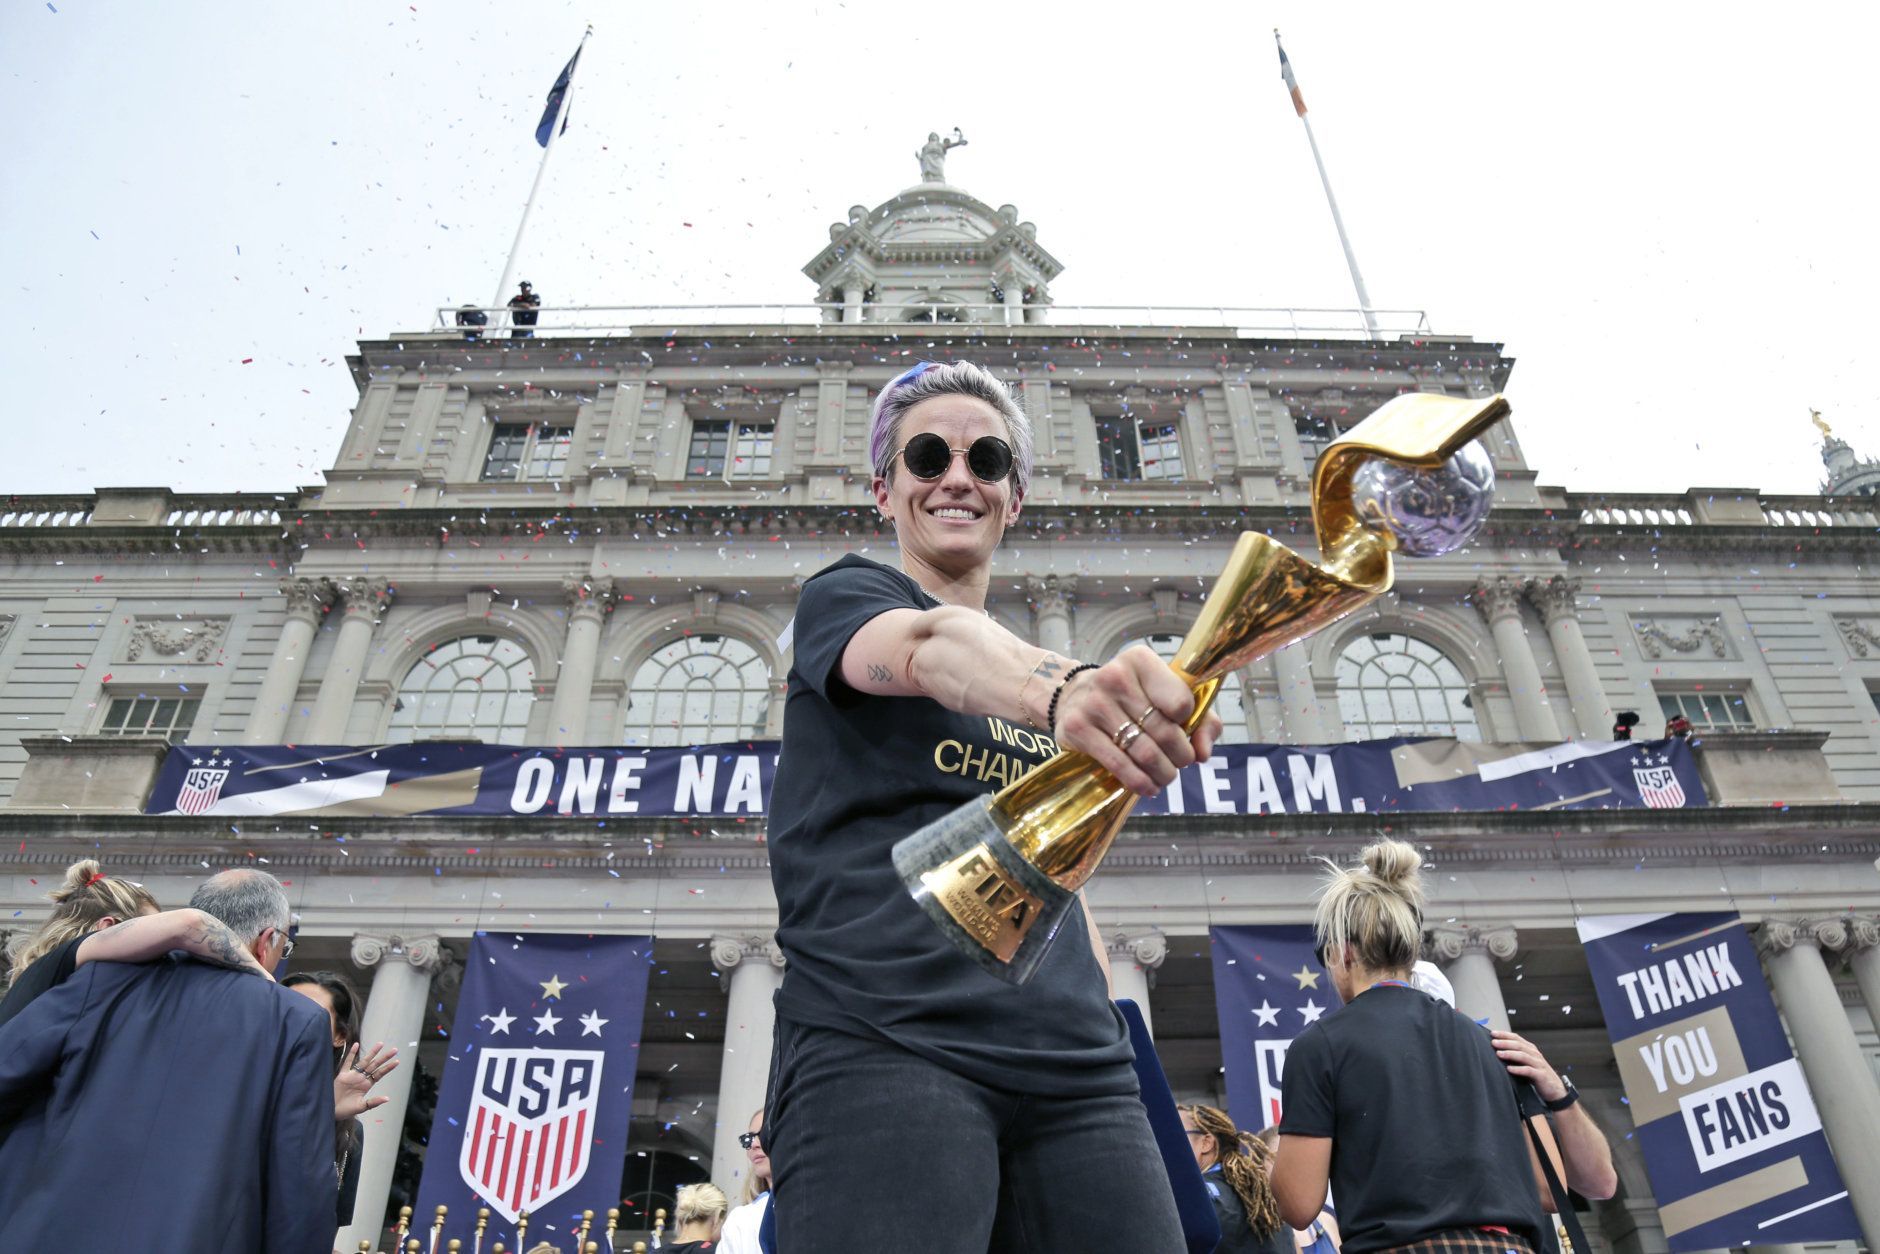 The U.S. women's soccer team member Megan Rapinoe holds the championship trophy at City Hall after a ticker tape parade, Wednesday, July 10, 2019 in New York. The U.S. national team beat the Netherlands 2-0 to capture a record fourth Women's World Cup title. (AP Photo/Seth Wenig)